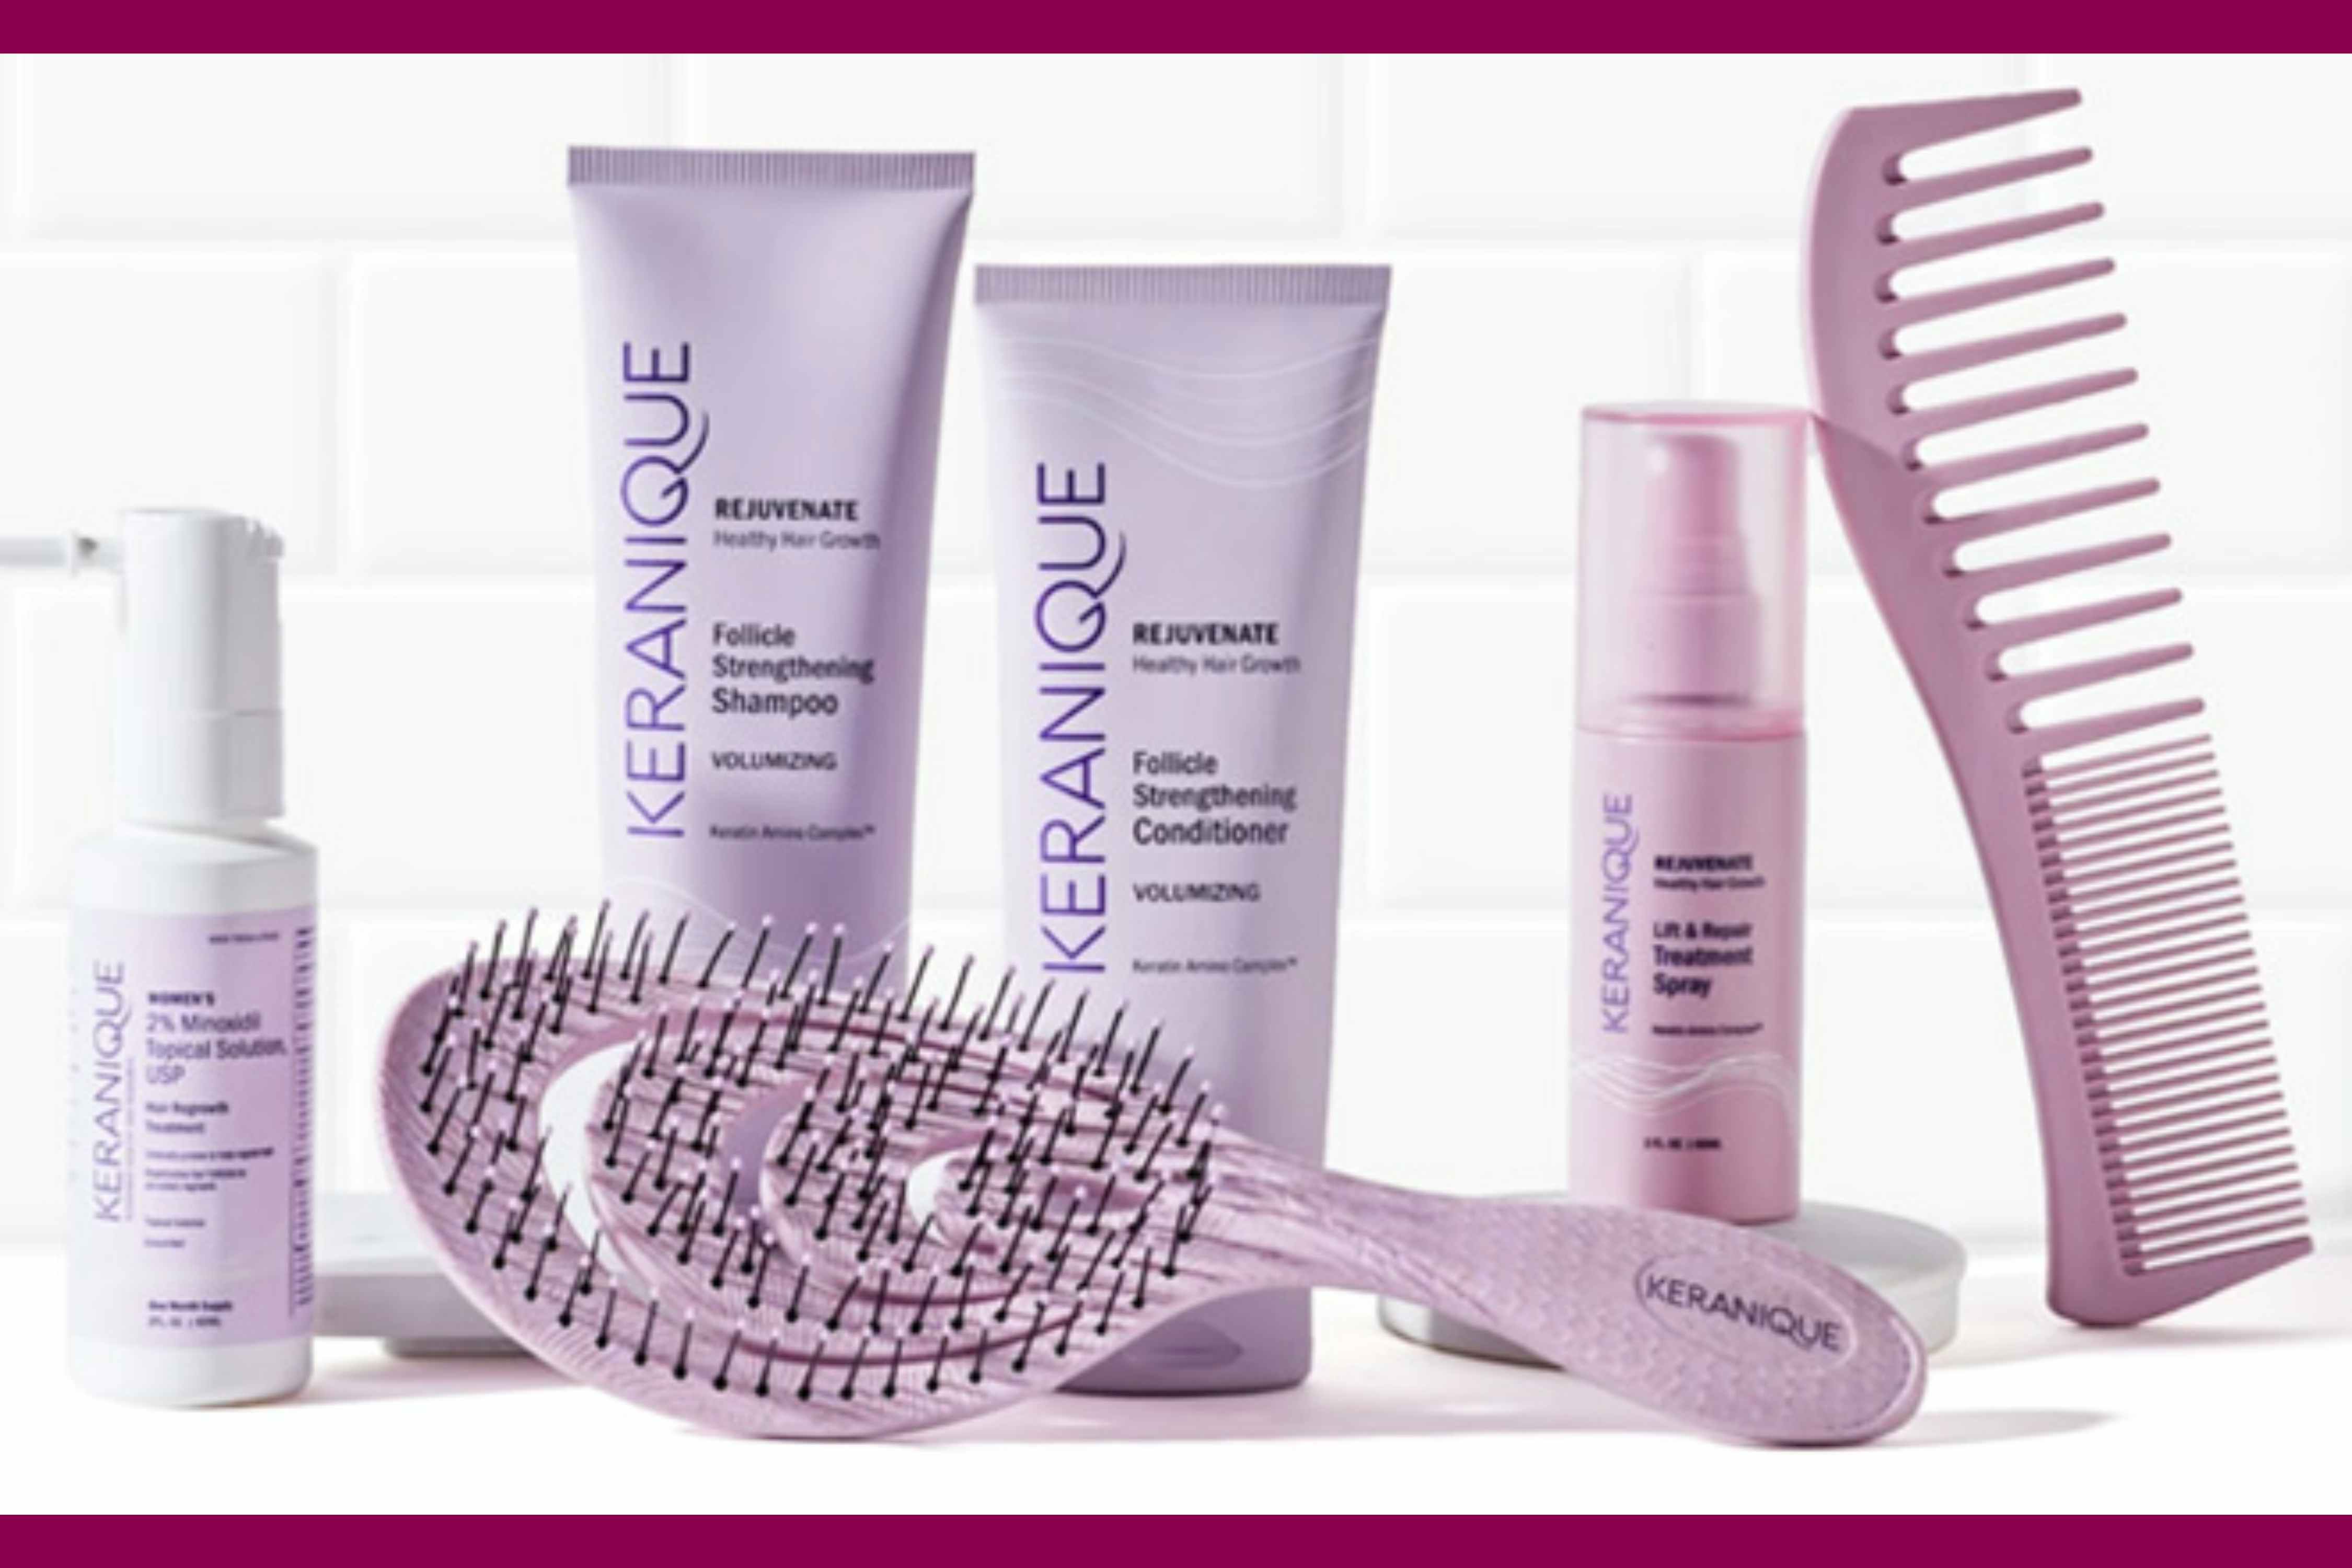 Keranique Hair Regrowth System and 6-Piece Travel Kit, Just $39.95